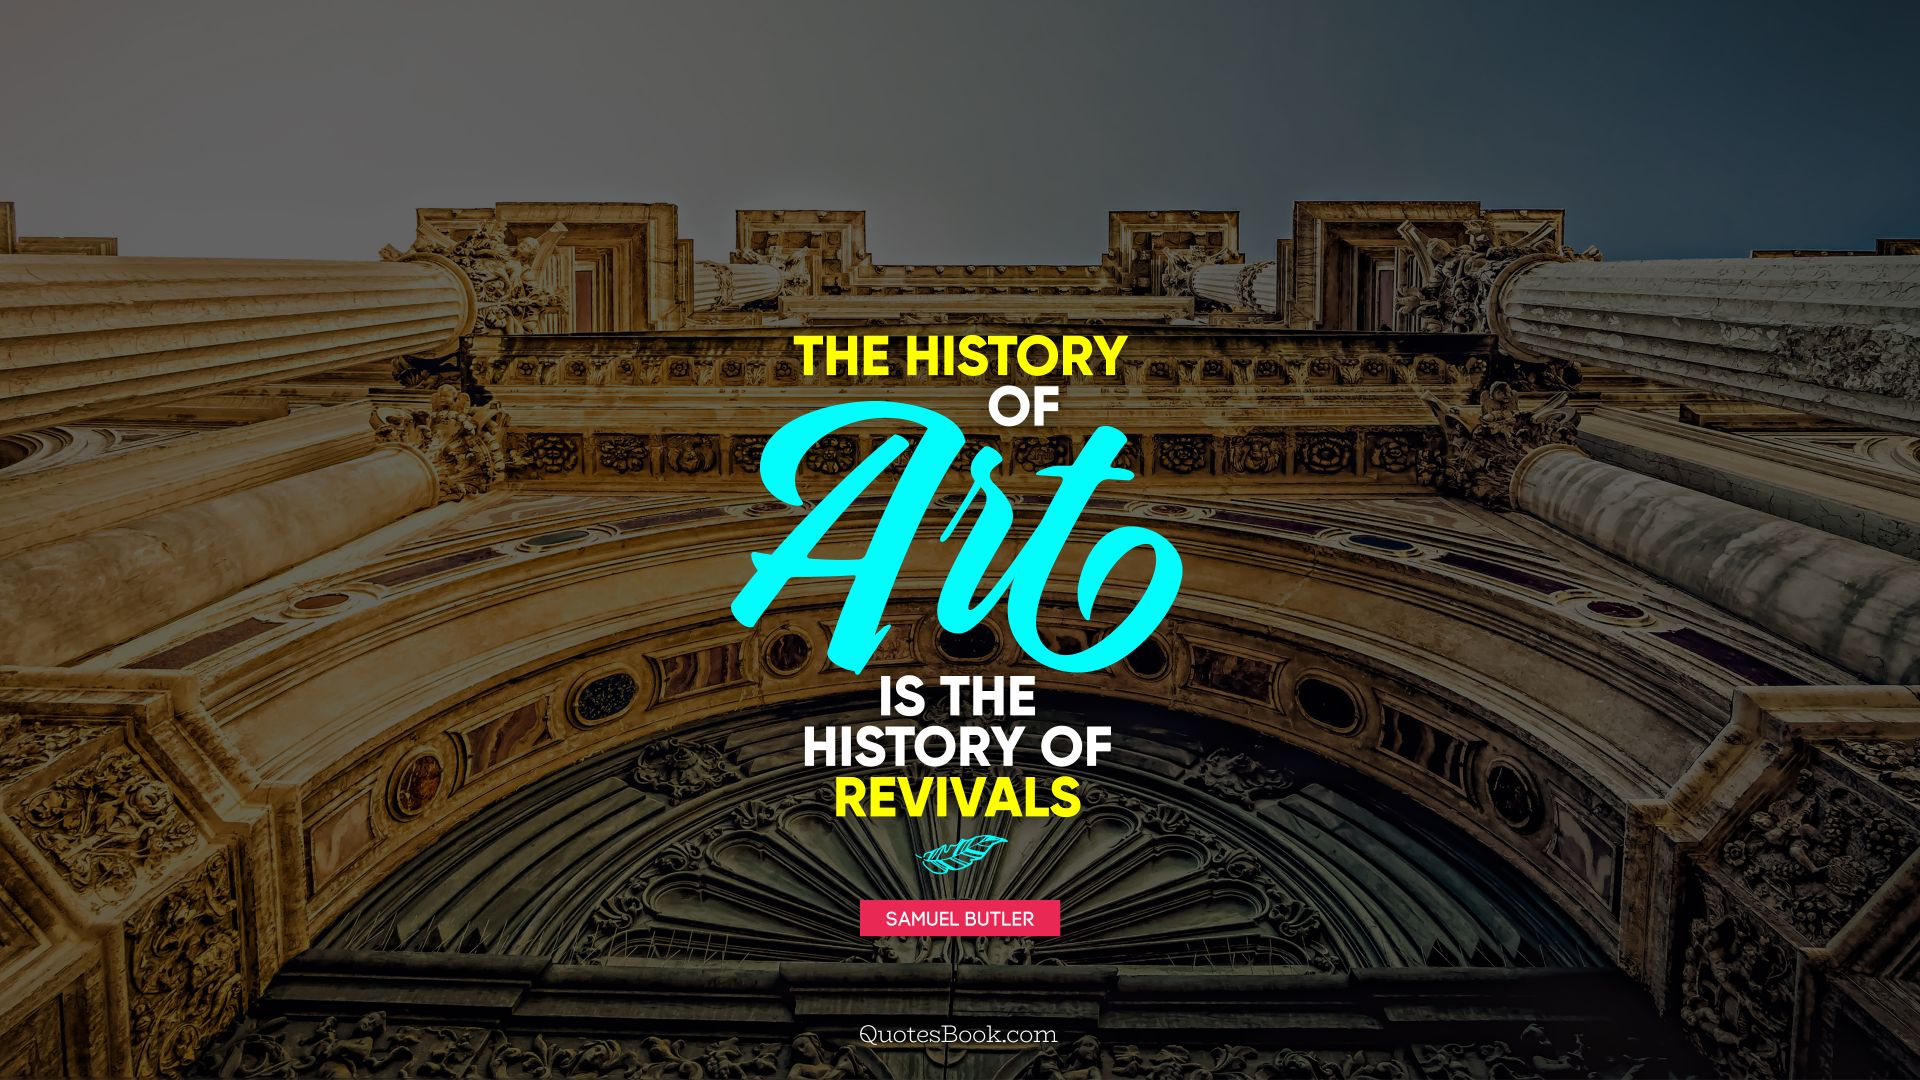 The history of art is the history of revivals  . - Quote by Samuel Butler